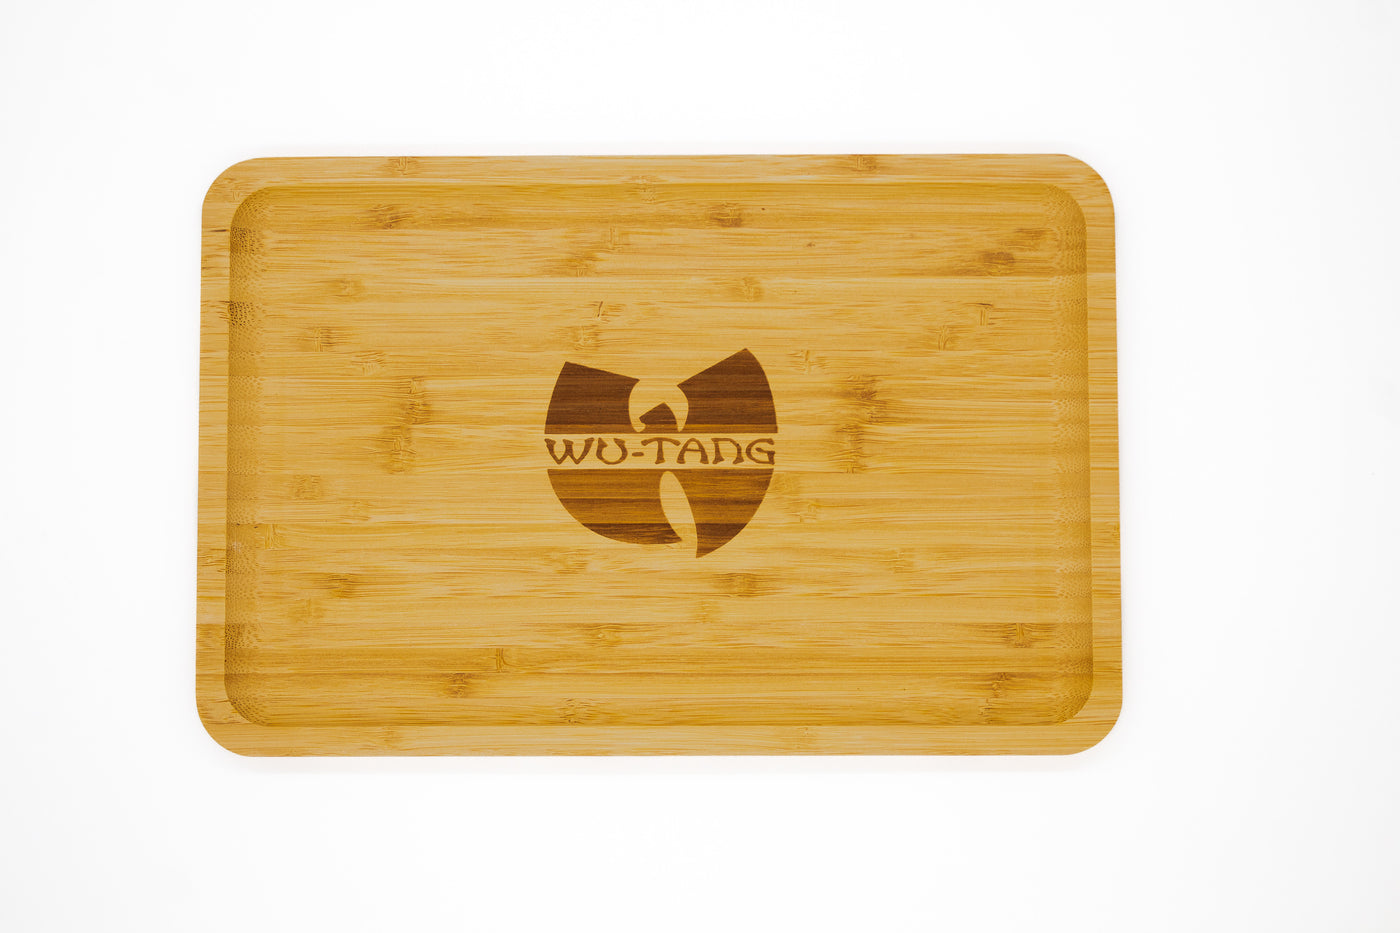 Bird's eye view image of Bamboo Rolling Tray